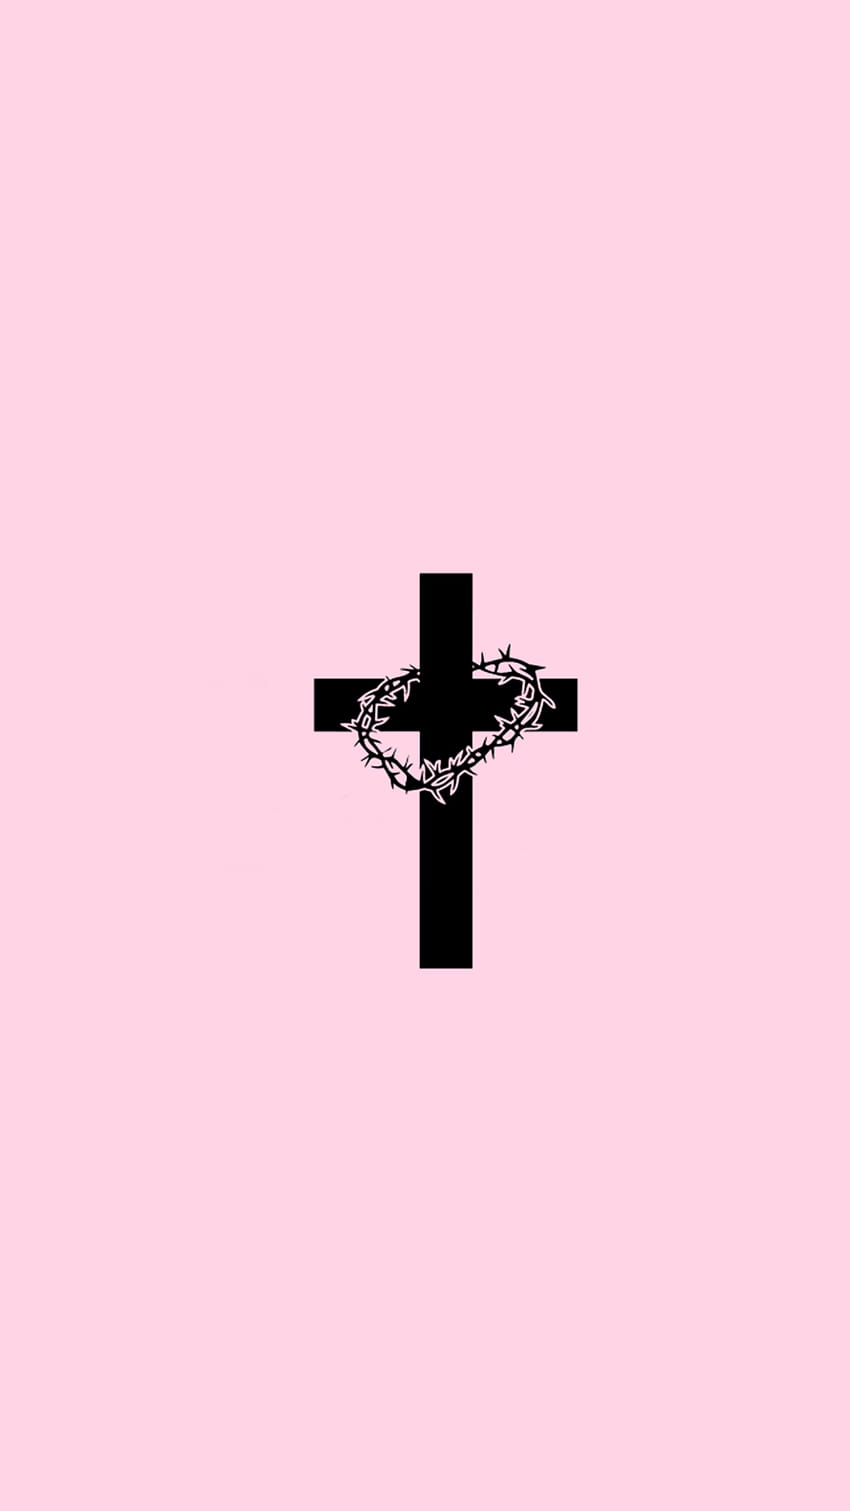 Cross with a crown of thorns - Cross